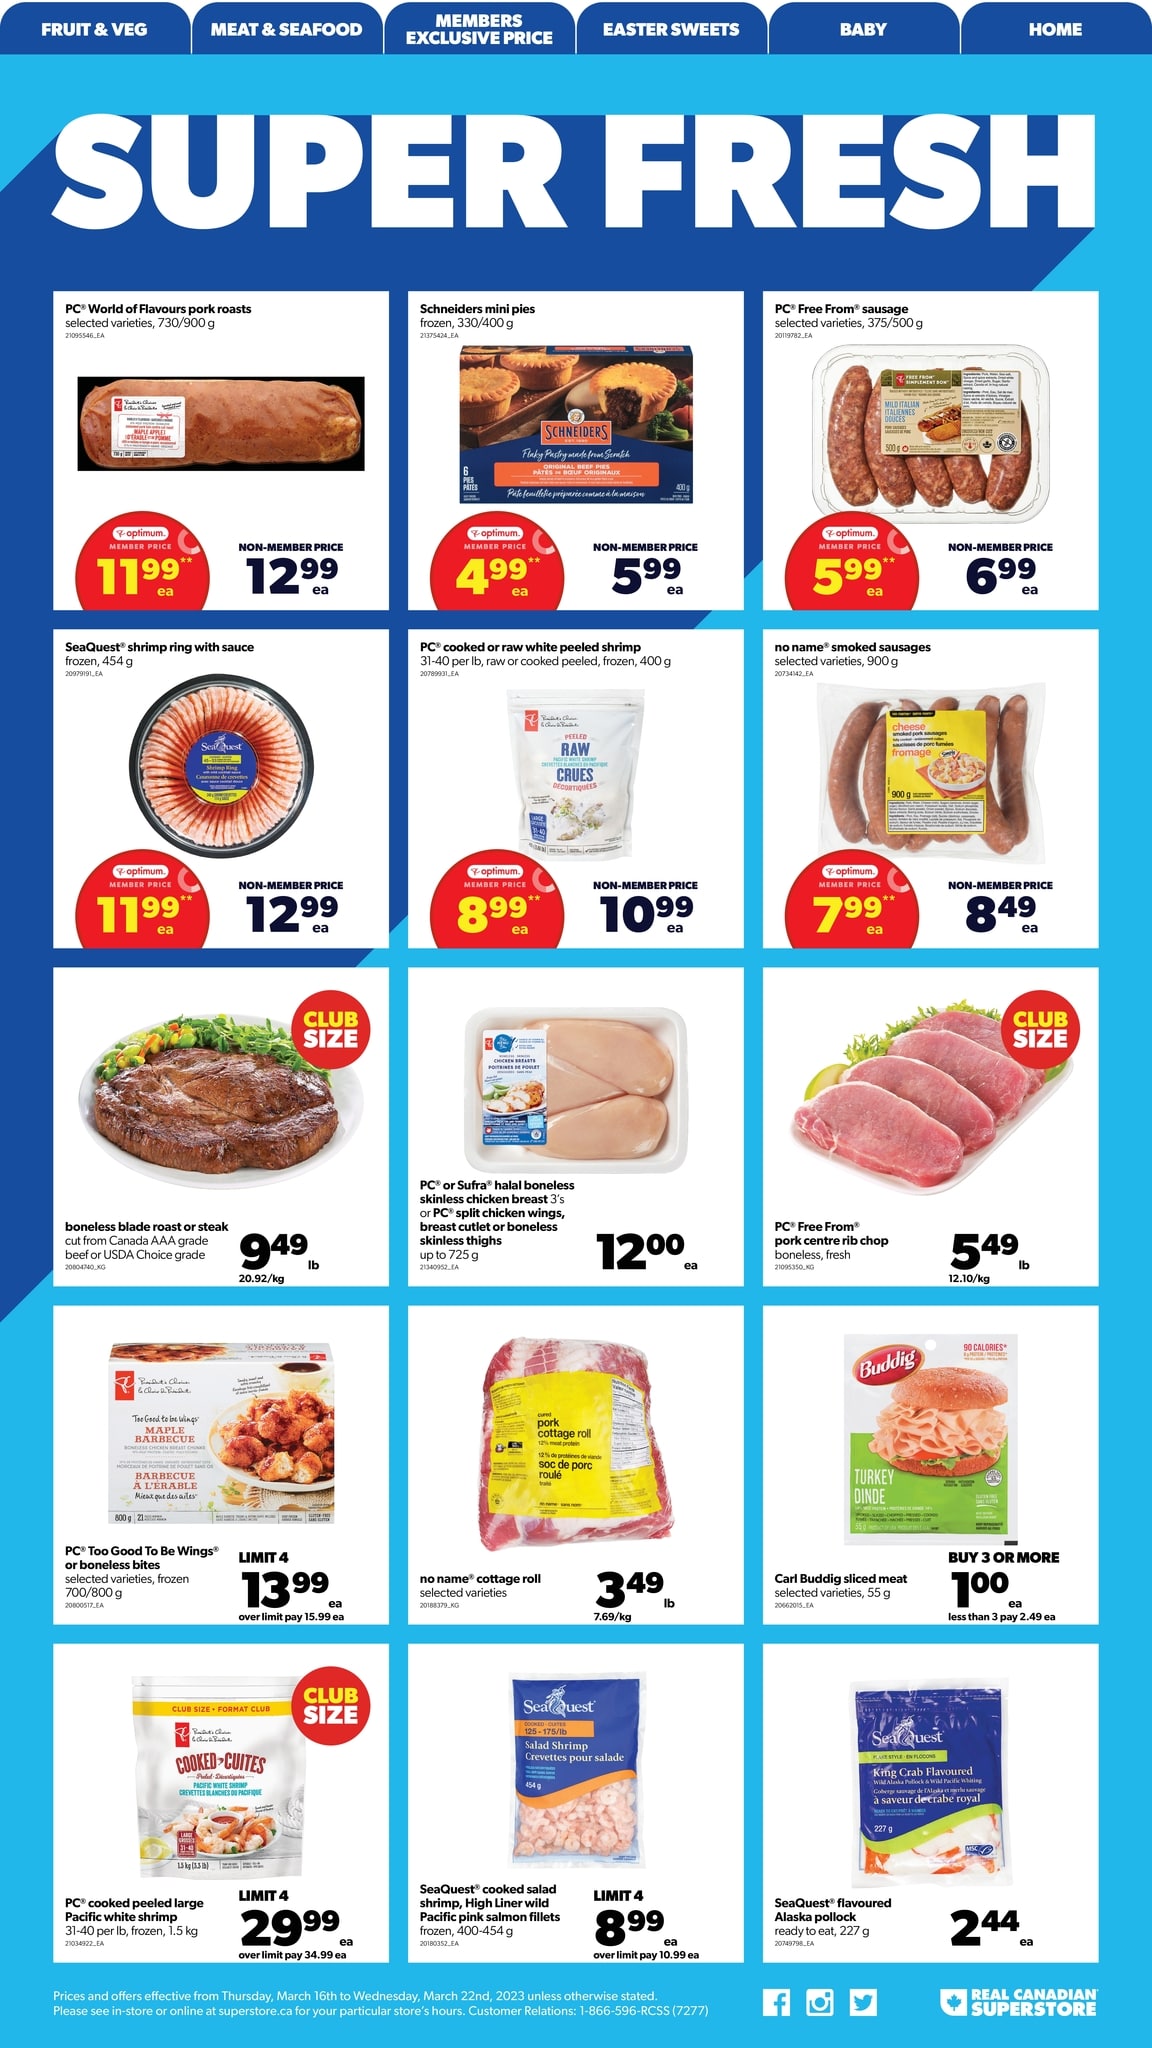 Real Canadian Superstore - Ontario - Weekly Flyer Specials - Page 3